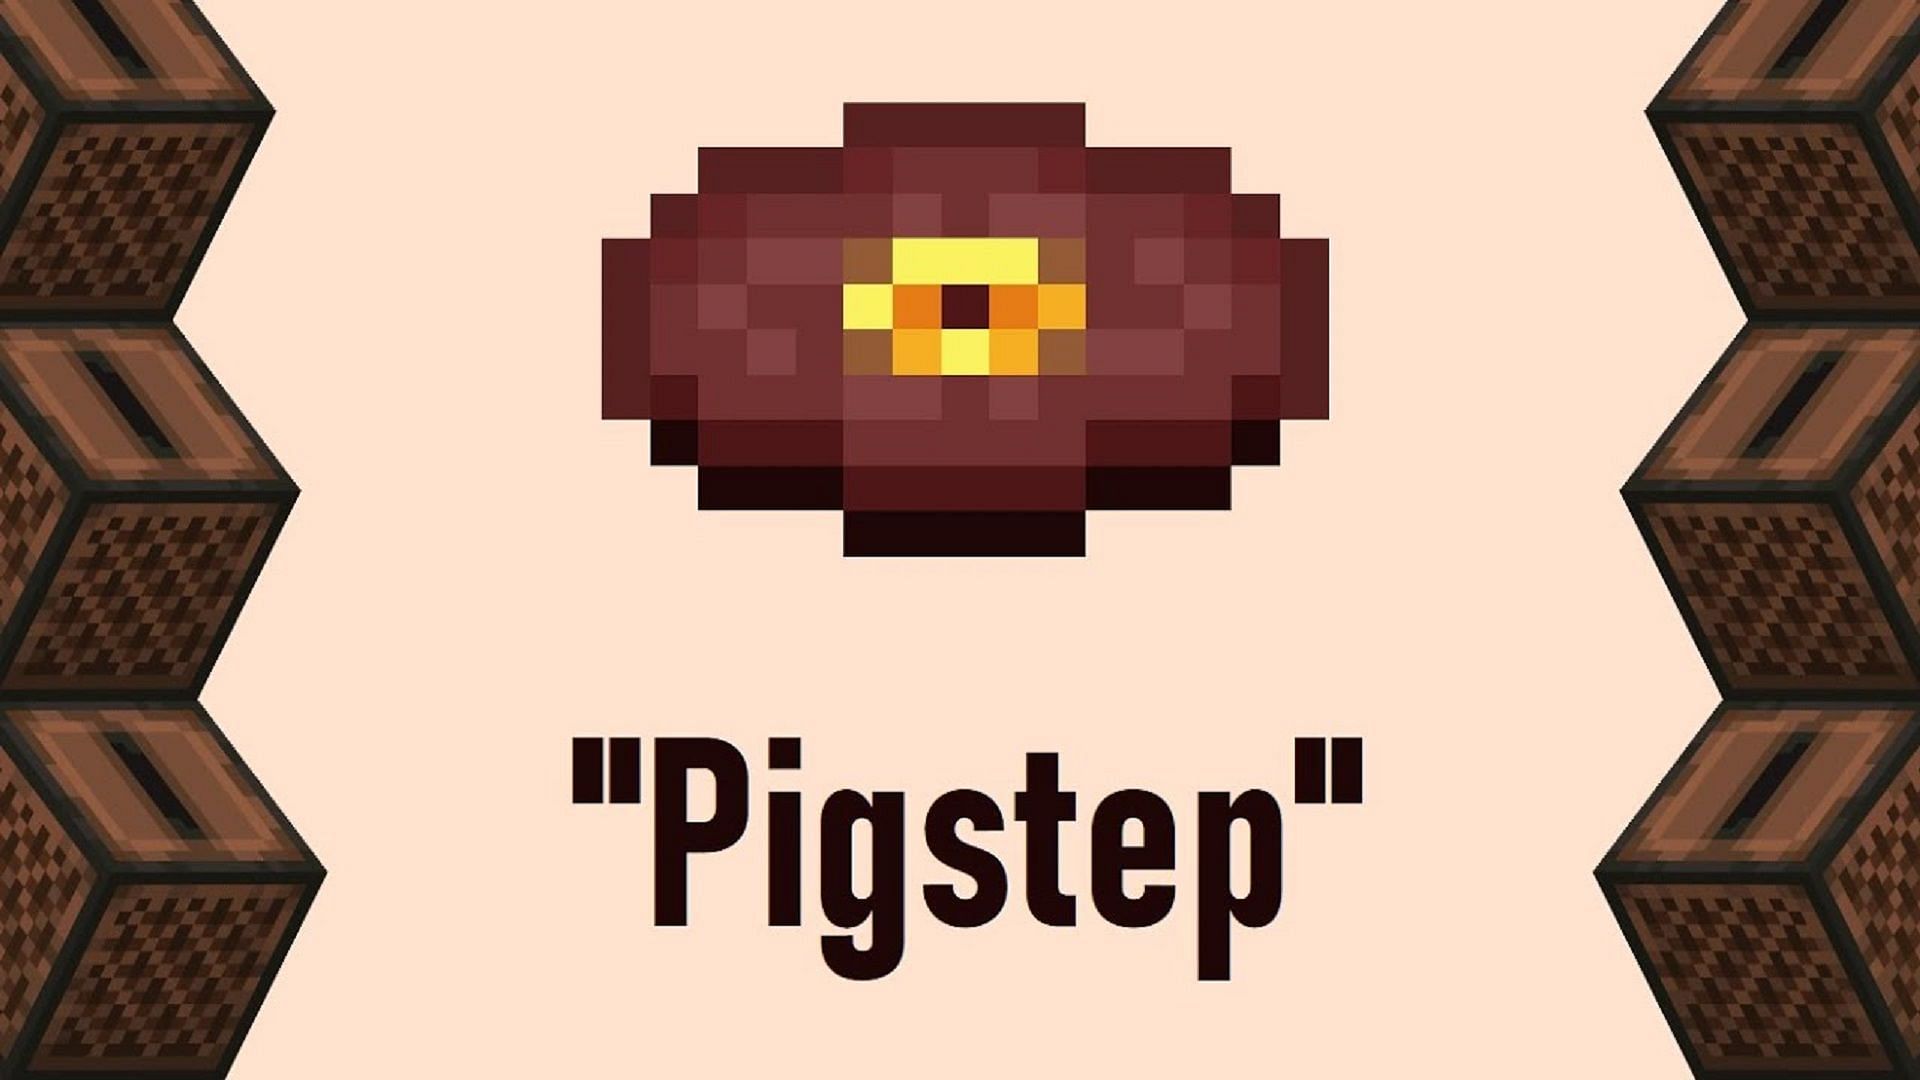 Pigstep has long been considered the game&#039;s rarest music disc (Image via Conduit/Youtube)